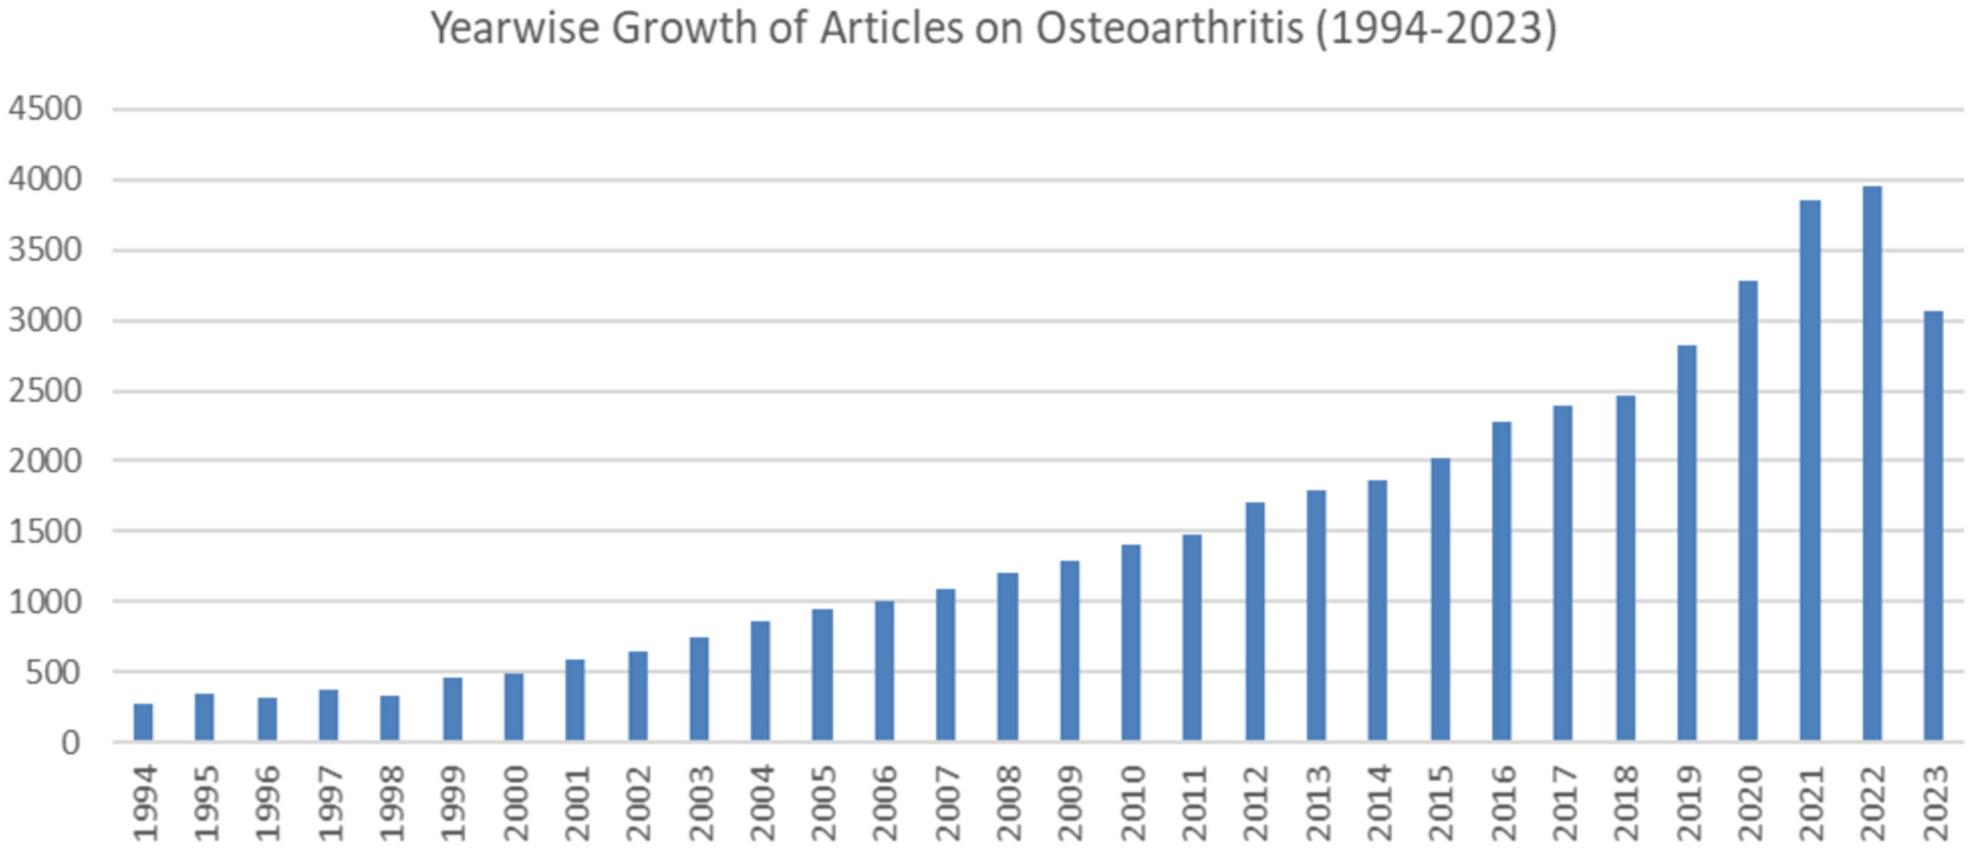 Global Research on Osteoarthritis During 1994–2023: A Scientometric Assessment of Publications and Citations